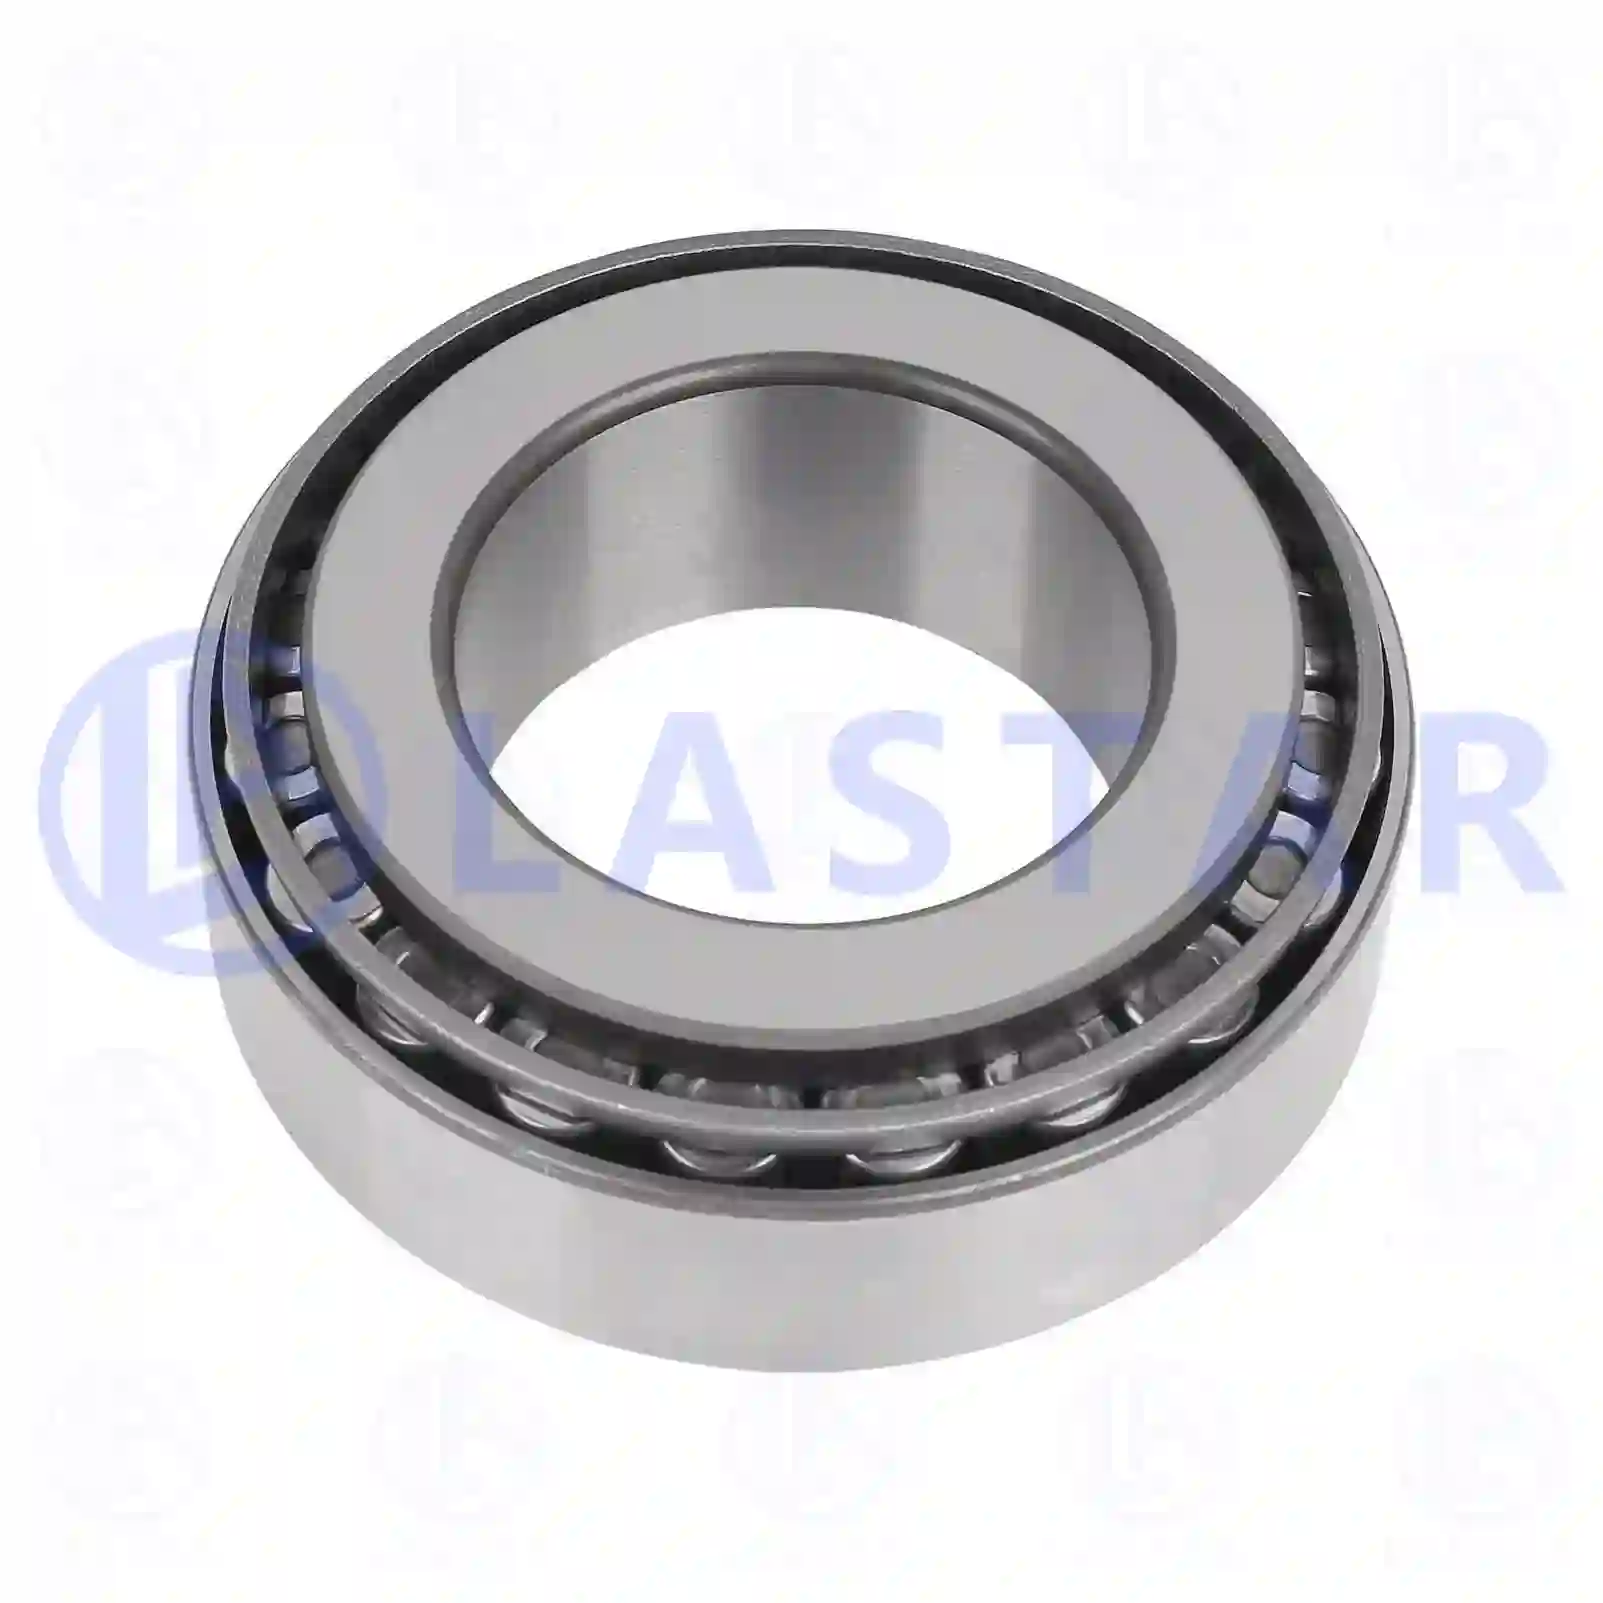 Tapered roller bearing, 77730935, 005090878, 4207540, TK4207540000, 01103142, 10500503, 710500503, 94050722, 988470101, 988470101A, 1-09812058-0, 1-09812062-0, 01103142, 01905296, 1905296, 26800200, 5010439064, 0009819305, 000720033214, 0019818005, 0039815205, 0039815605, 0039818505, 0049817305, 0069815205, 0069816405, 0023336061, 0023336111, 0959232214, 5000470673, 5000470862, 5000609898, 5010136663, 5010439064, 5010596402, 7401524058, 7401654326, 1524058, 1654326, 183279, 2808510 ||  77730935 Lastar Spare Part | Truck Spare Parts, Auotomotive Spare Parts Tapered roller bearing, 77730935, 005090878, 4207540, TK4207540000, 01103142, 10500503, 710500503, 94050722, 988470101, 988470101A, 1-09812058-0, 1-09812062-0, 01103142, 01905296, 1905296, 26800200, 5010439064, 0009819305, 000720033214, 0019818005, 0039815205, 0039815605, 0039818505, 0049817305, 0069815205, 0069816405, 0023336061, 0023336111, 0959232214, 5000470673, 5000470862, 5000609898, 5010136663, 5010439064, 5010596402, 7401524058, 7401654326, 1524058, 1654326, 183279, 2808510 ||  77730935 Lastar Spare Part | Truck Spare Parts, Auotomotive Spare Parts